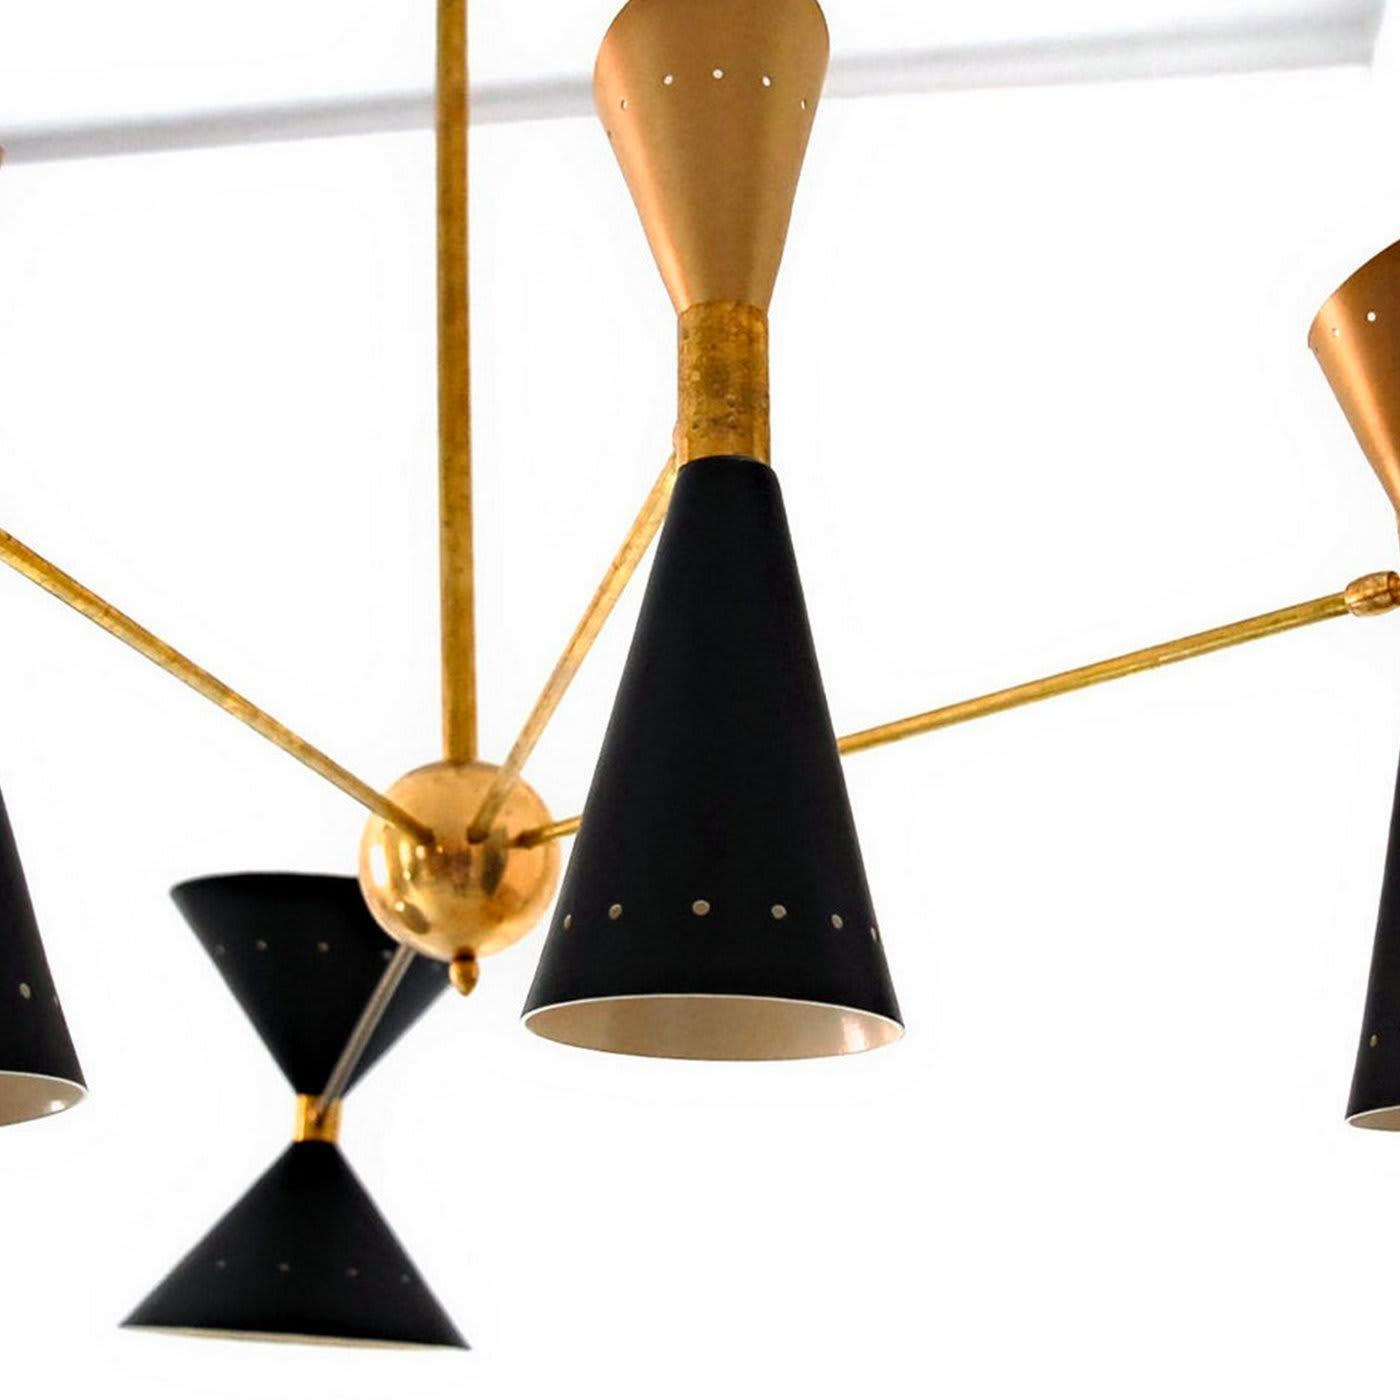 With a stunning design reminiscent of mid-century mobile sculptures, this chandelier features a natural solid brass structure with a central support balancing four arms creating a pleasing asymmetry. Providing a uniform illumination over a dining